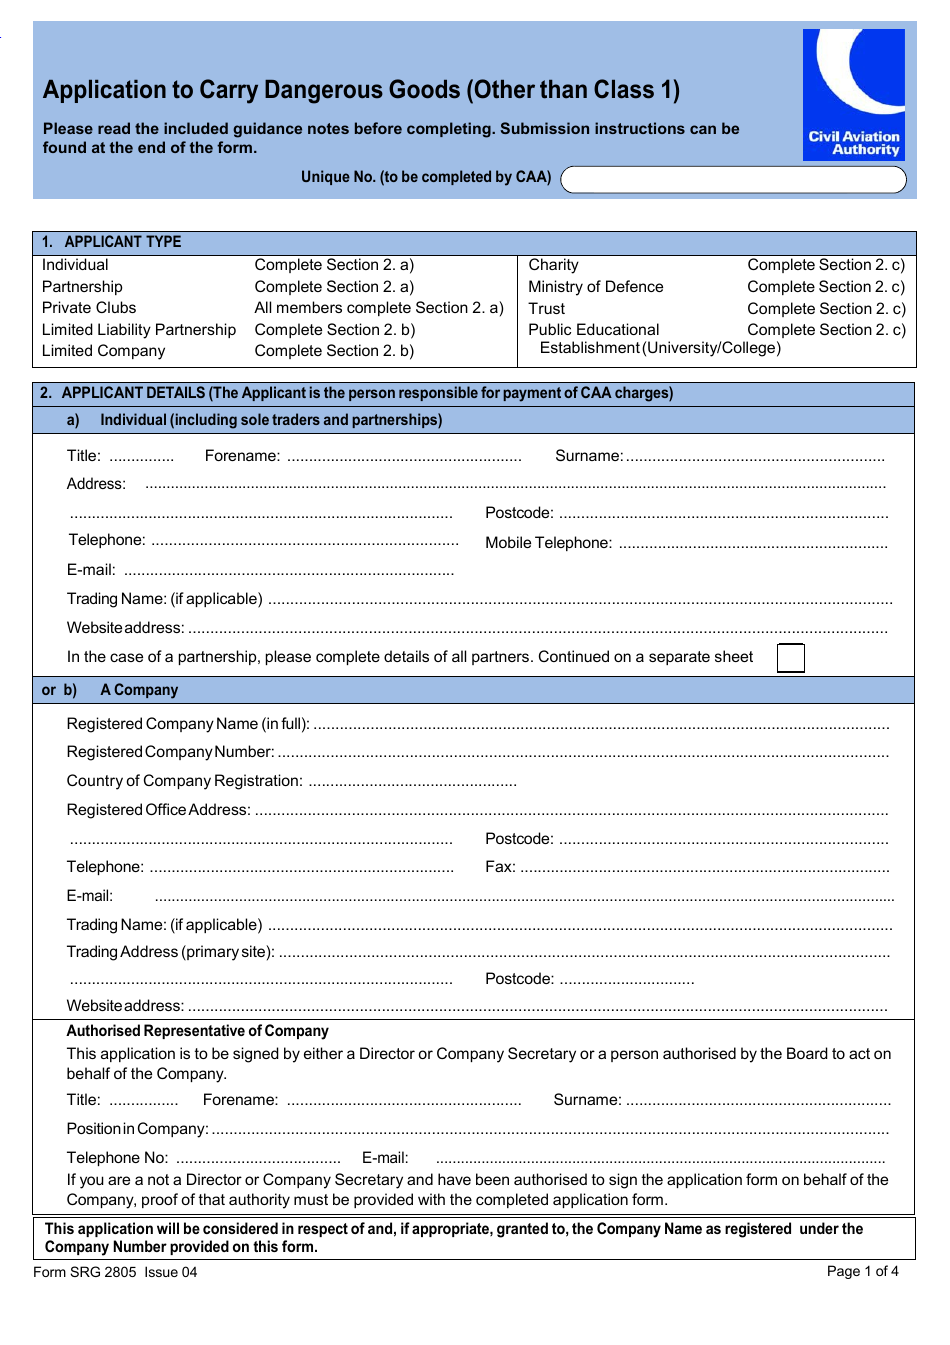 Form SRG2805 Application to Carry Dangerous Goods (Other Than Class 1) - United Kingdom, Page 1